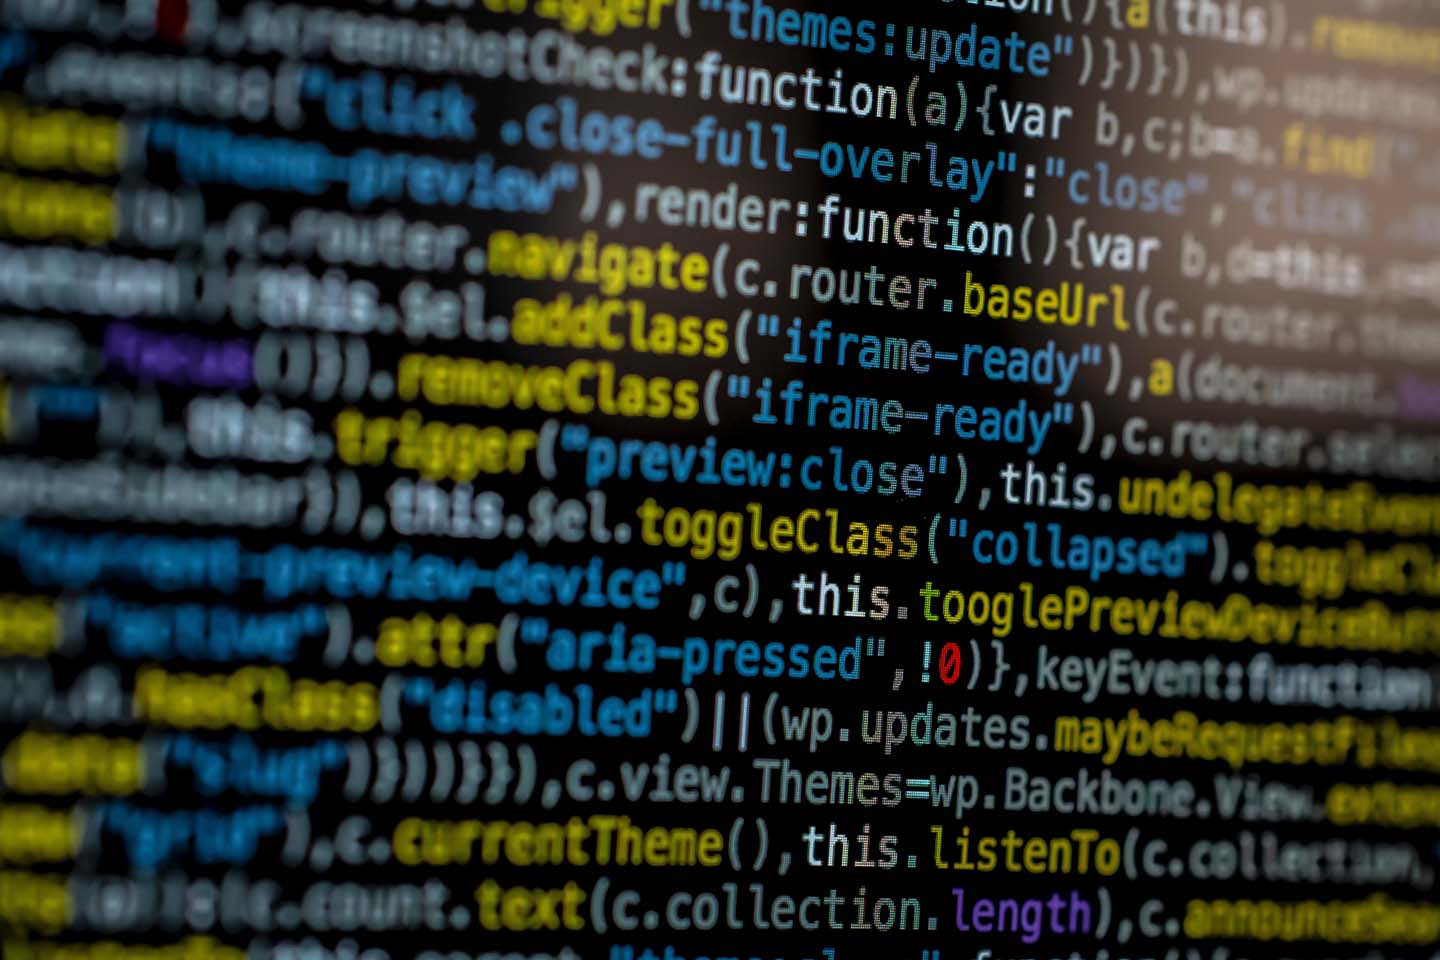 Photo of Computer Code on Screen by Markus Spiske from Pexels